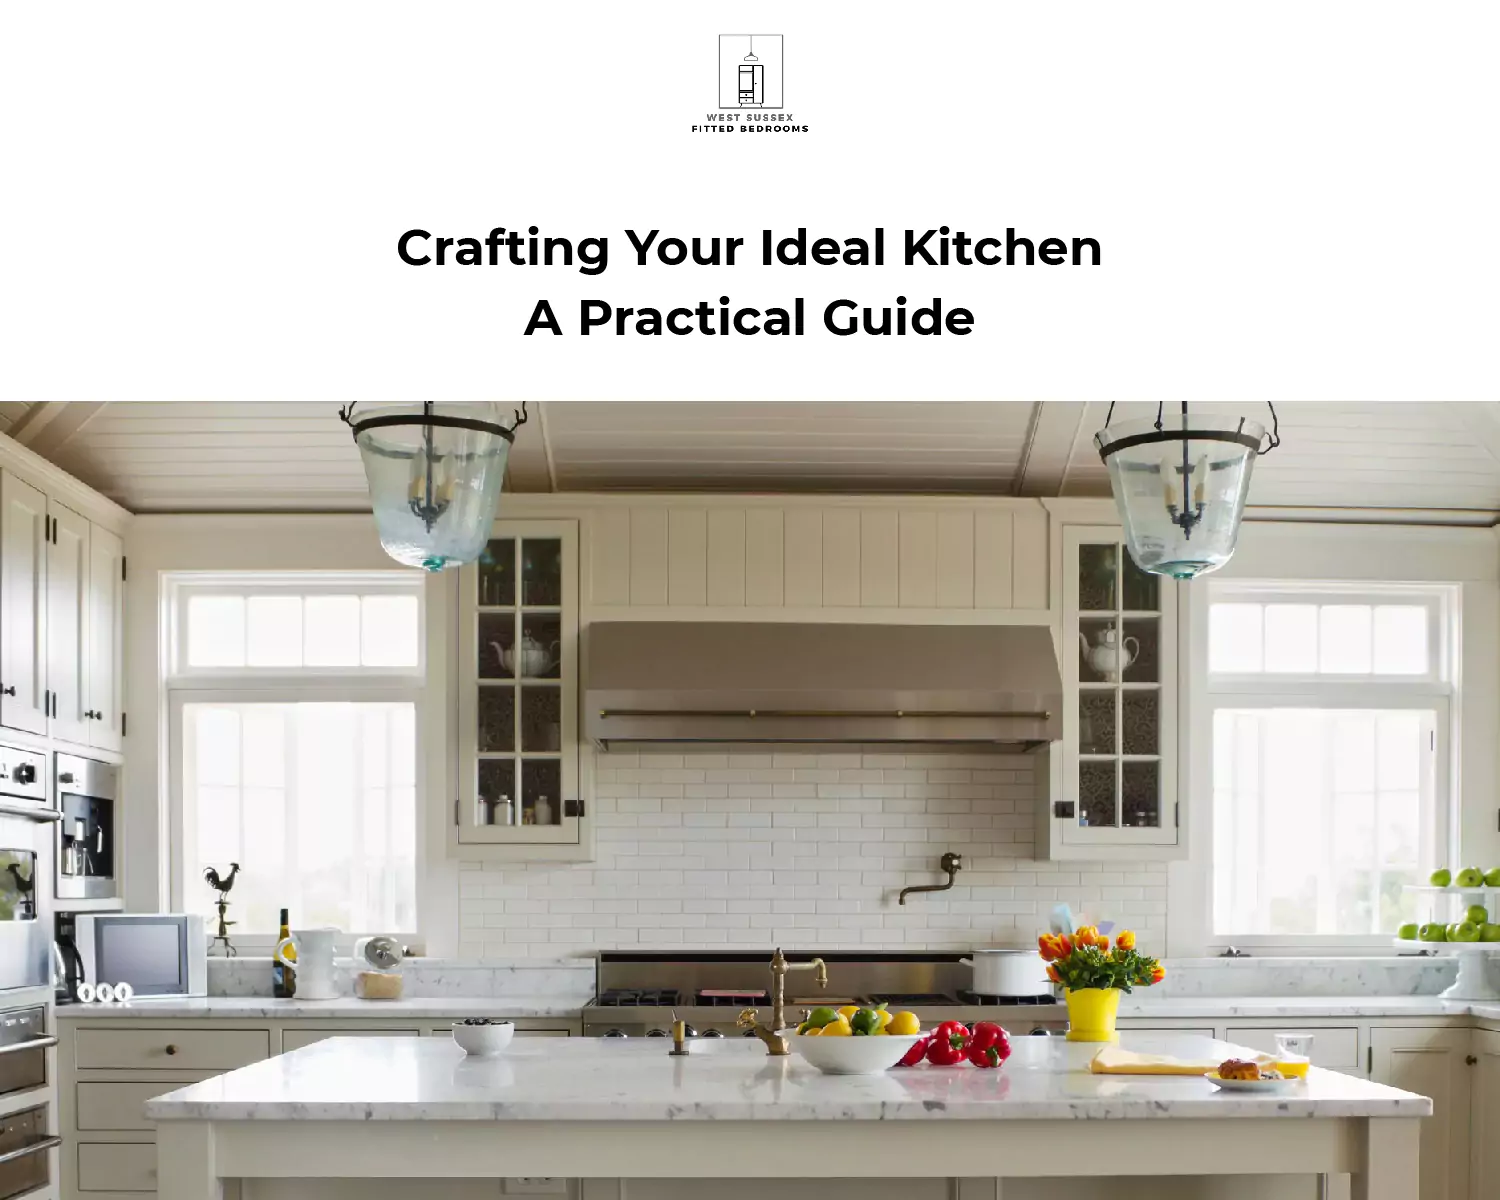 Crafting Your Ideal Kitchen: A Practical Guide